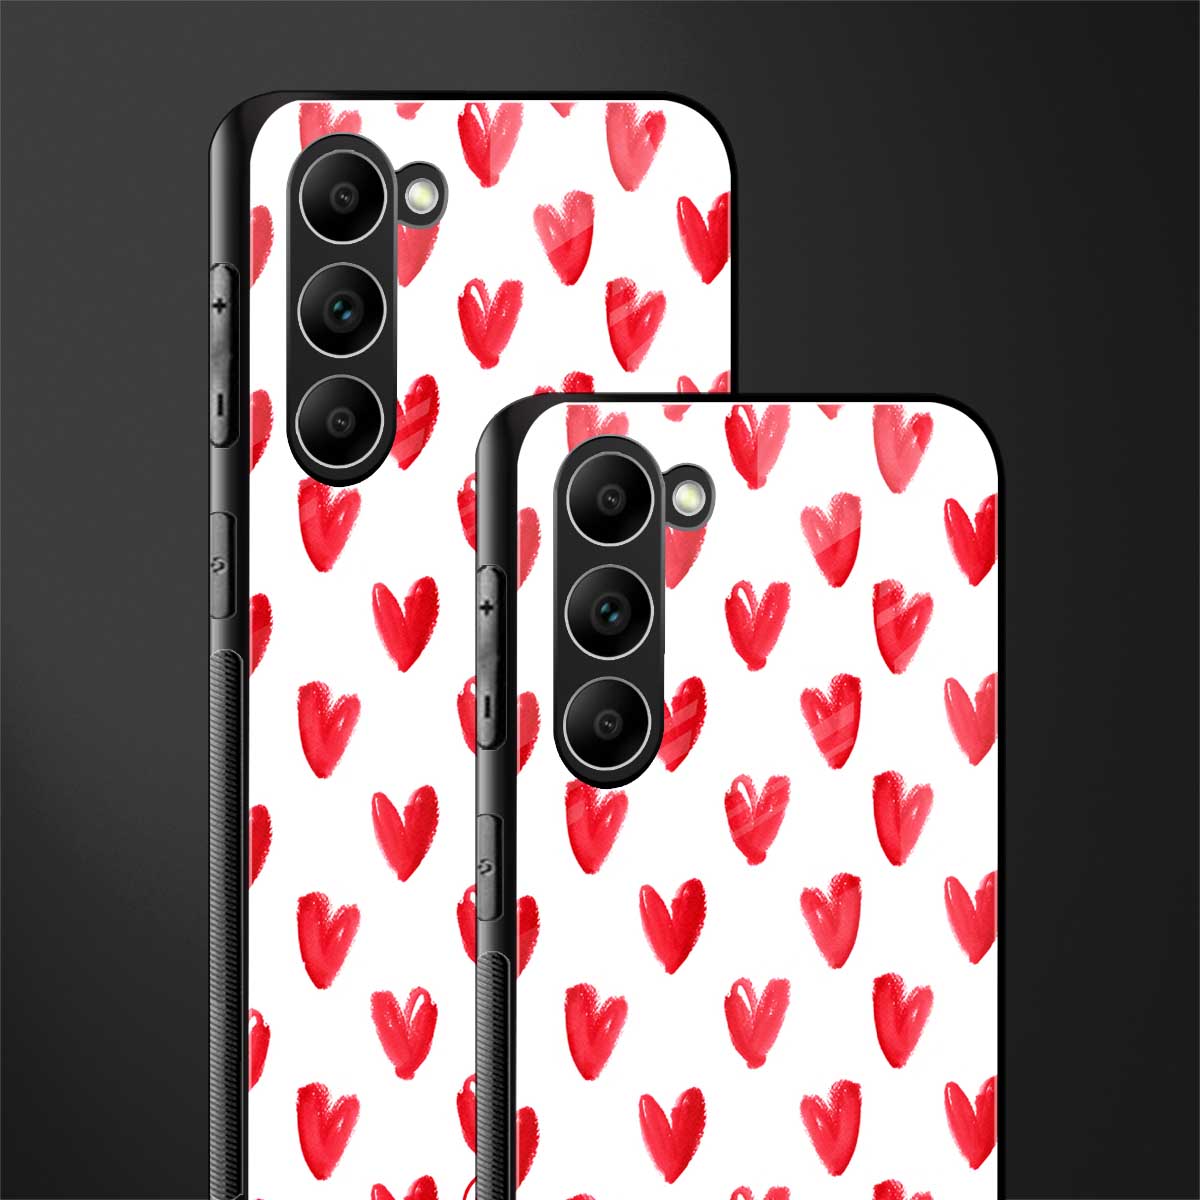 love is love glass case for phone case | glass case for samsung galaxy s23 plus